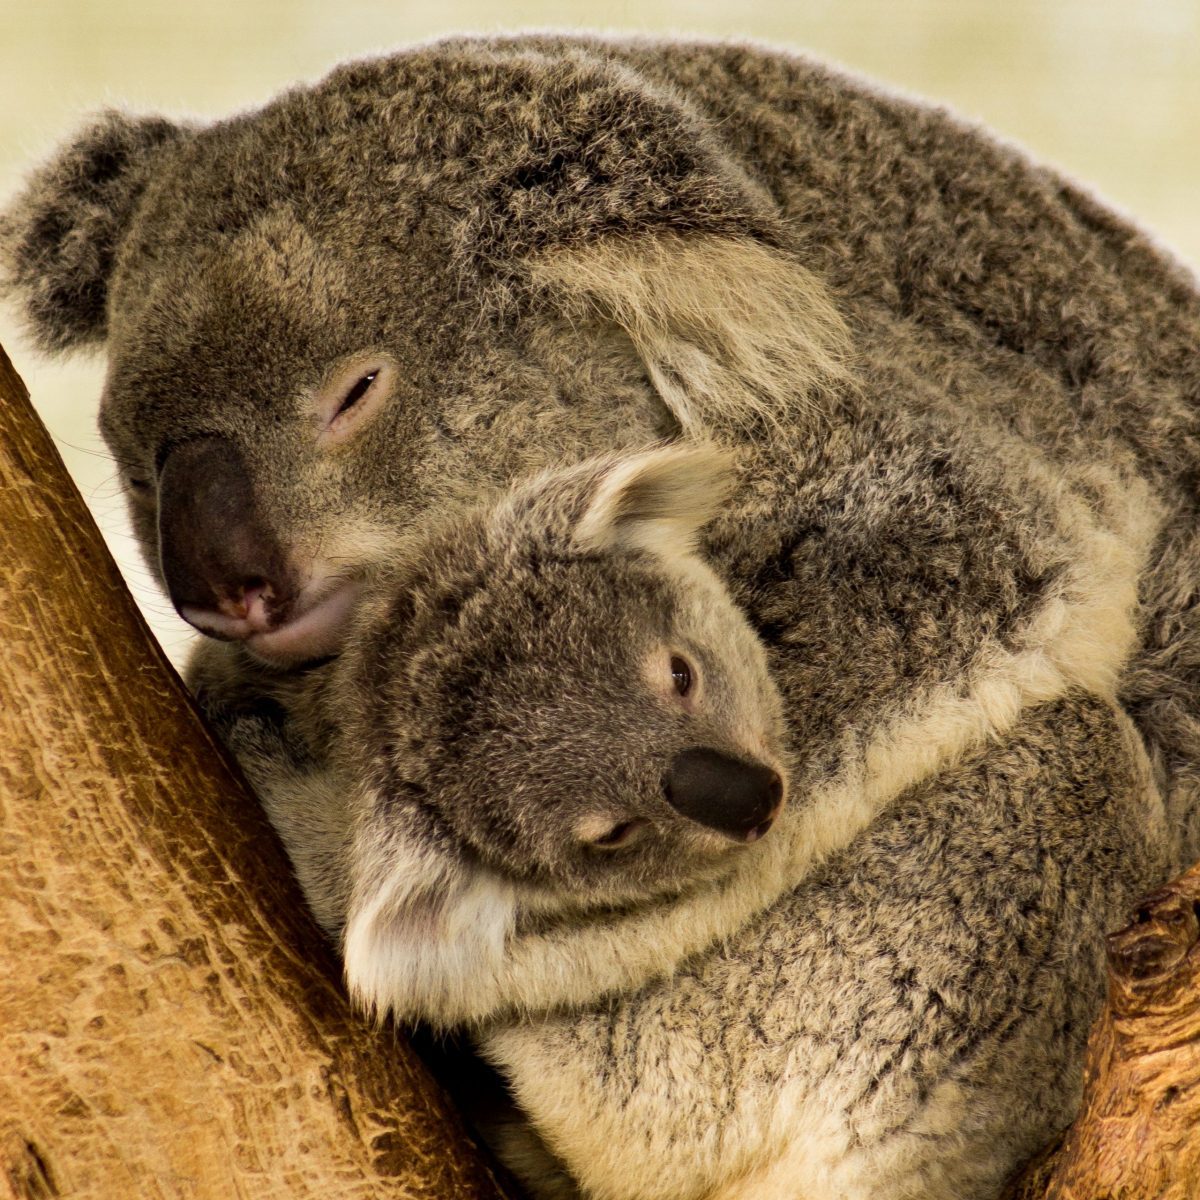 a baby koala sleeps securely in its mothers arms 2021 08 31 04 06 22 utc scaled e1651177794756